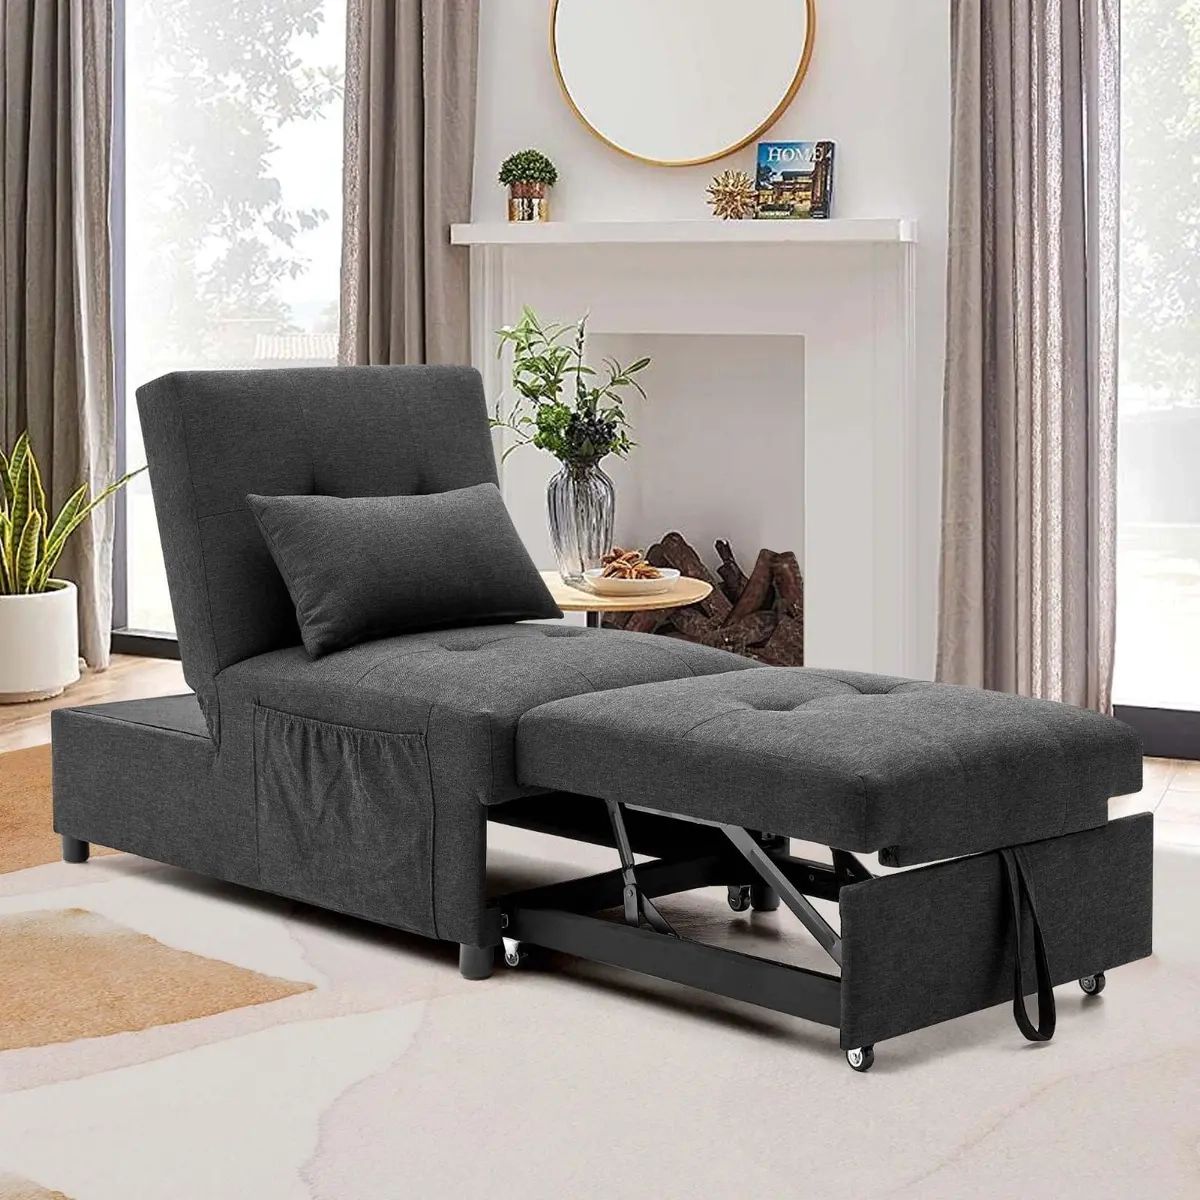 Convertible Sofa Chair Futon Bed 4 In 1 Pull Out Sleeper Chaise Home  Furniture | Ebay Throughout 4 In 1 Convertible Sleeper Chair Beds (Photo 3 of 15)